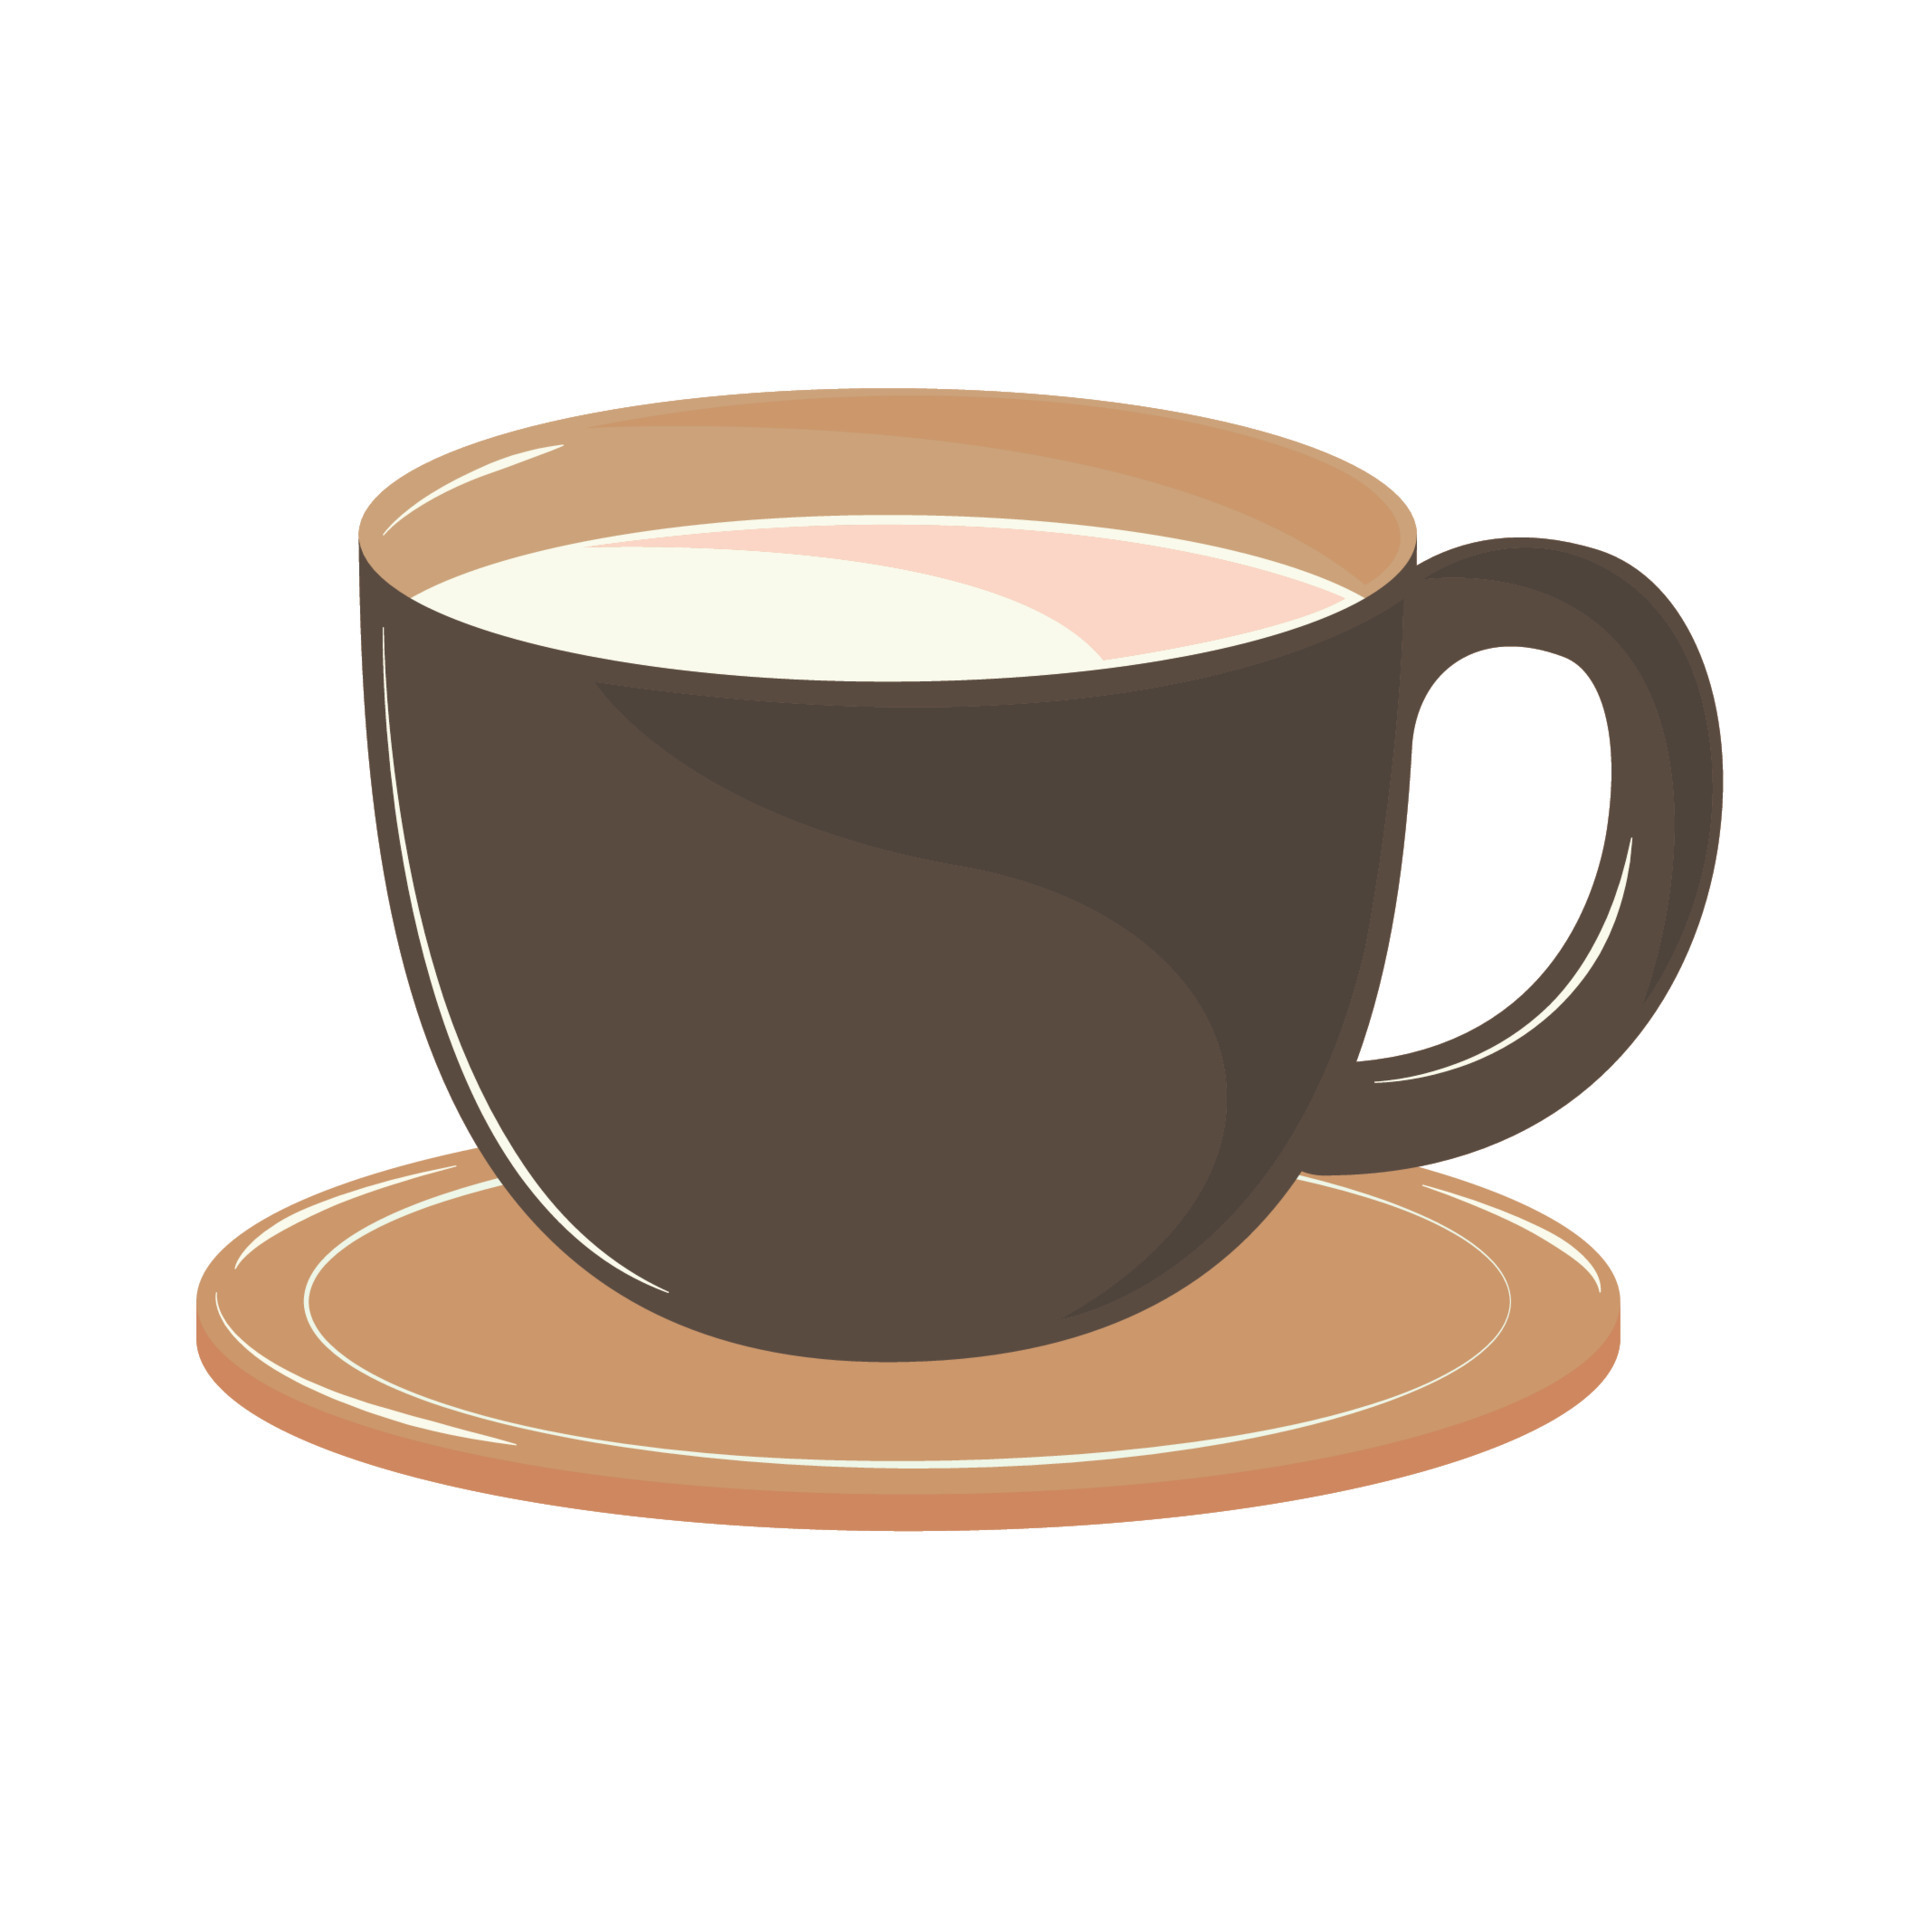 https://static.vecteezy.com/system/resources/previews/010/825/284/original/cup-of-coffee-free-vector.jpg